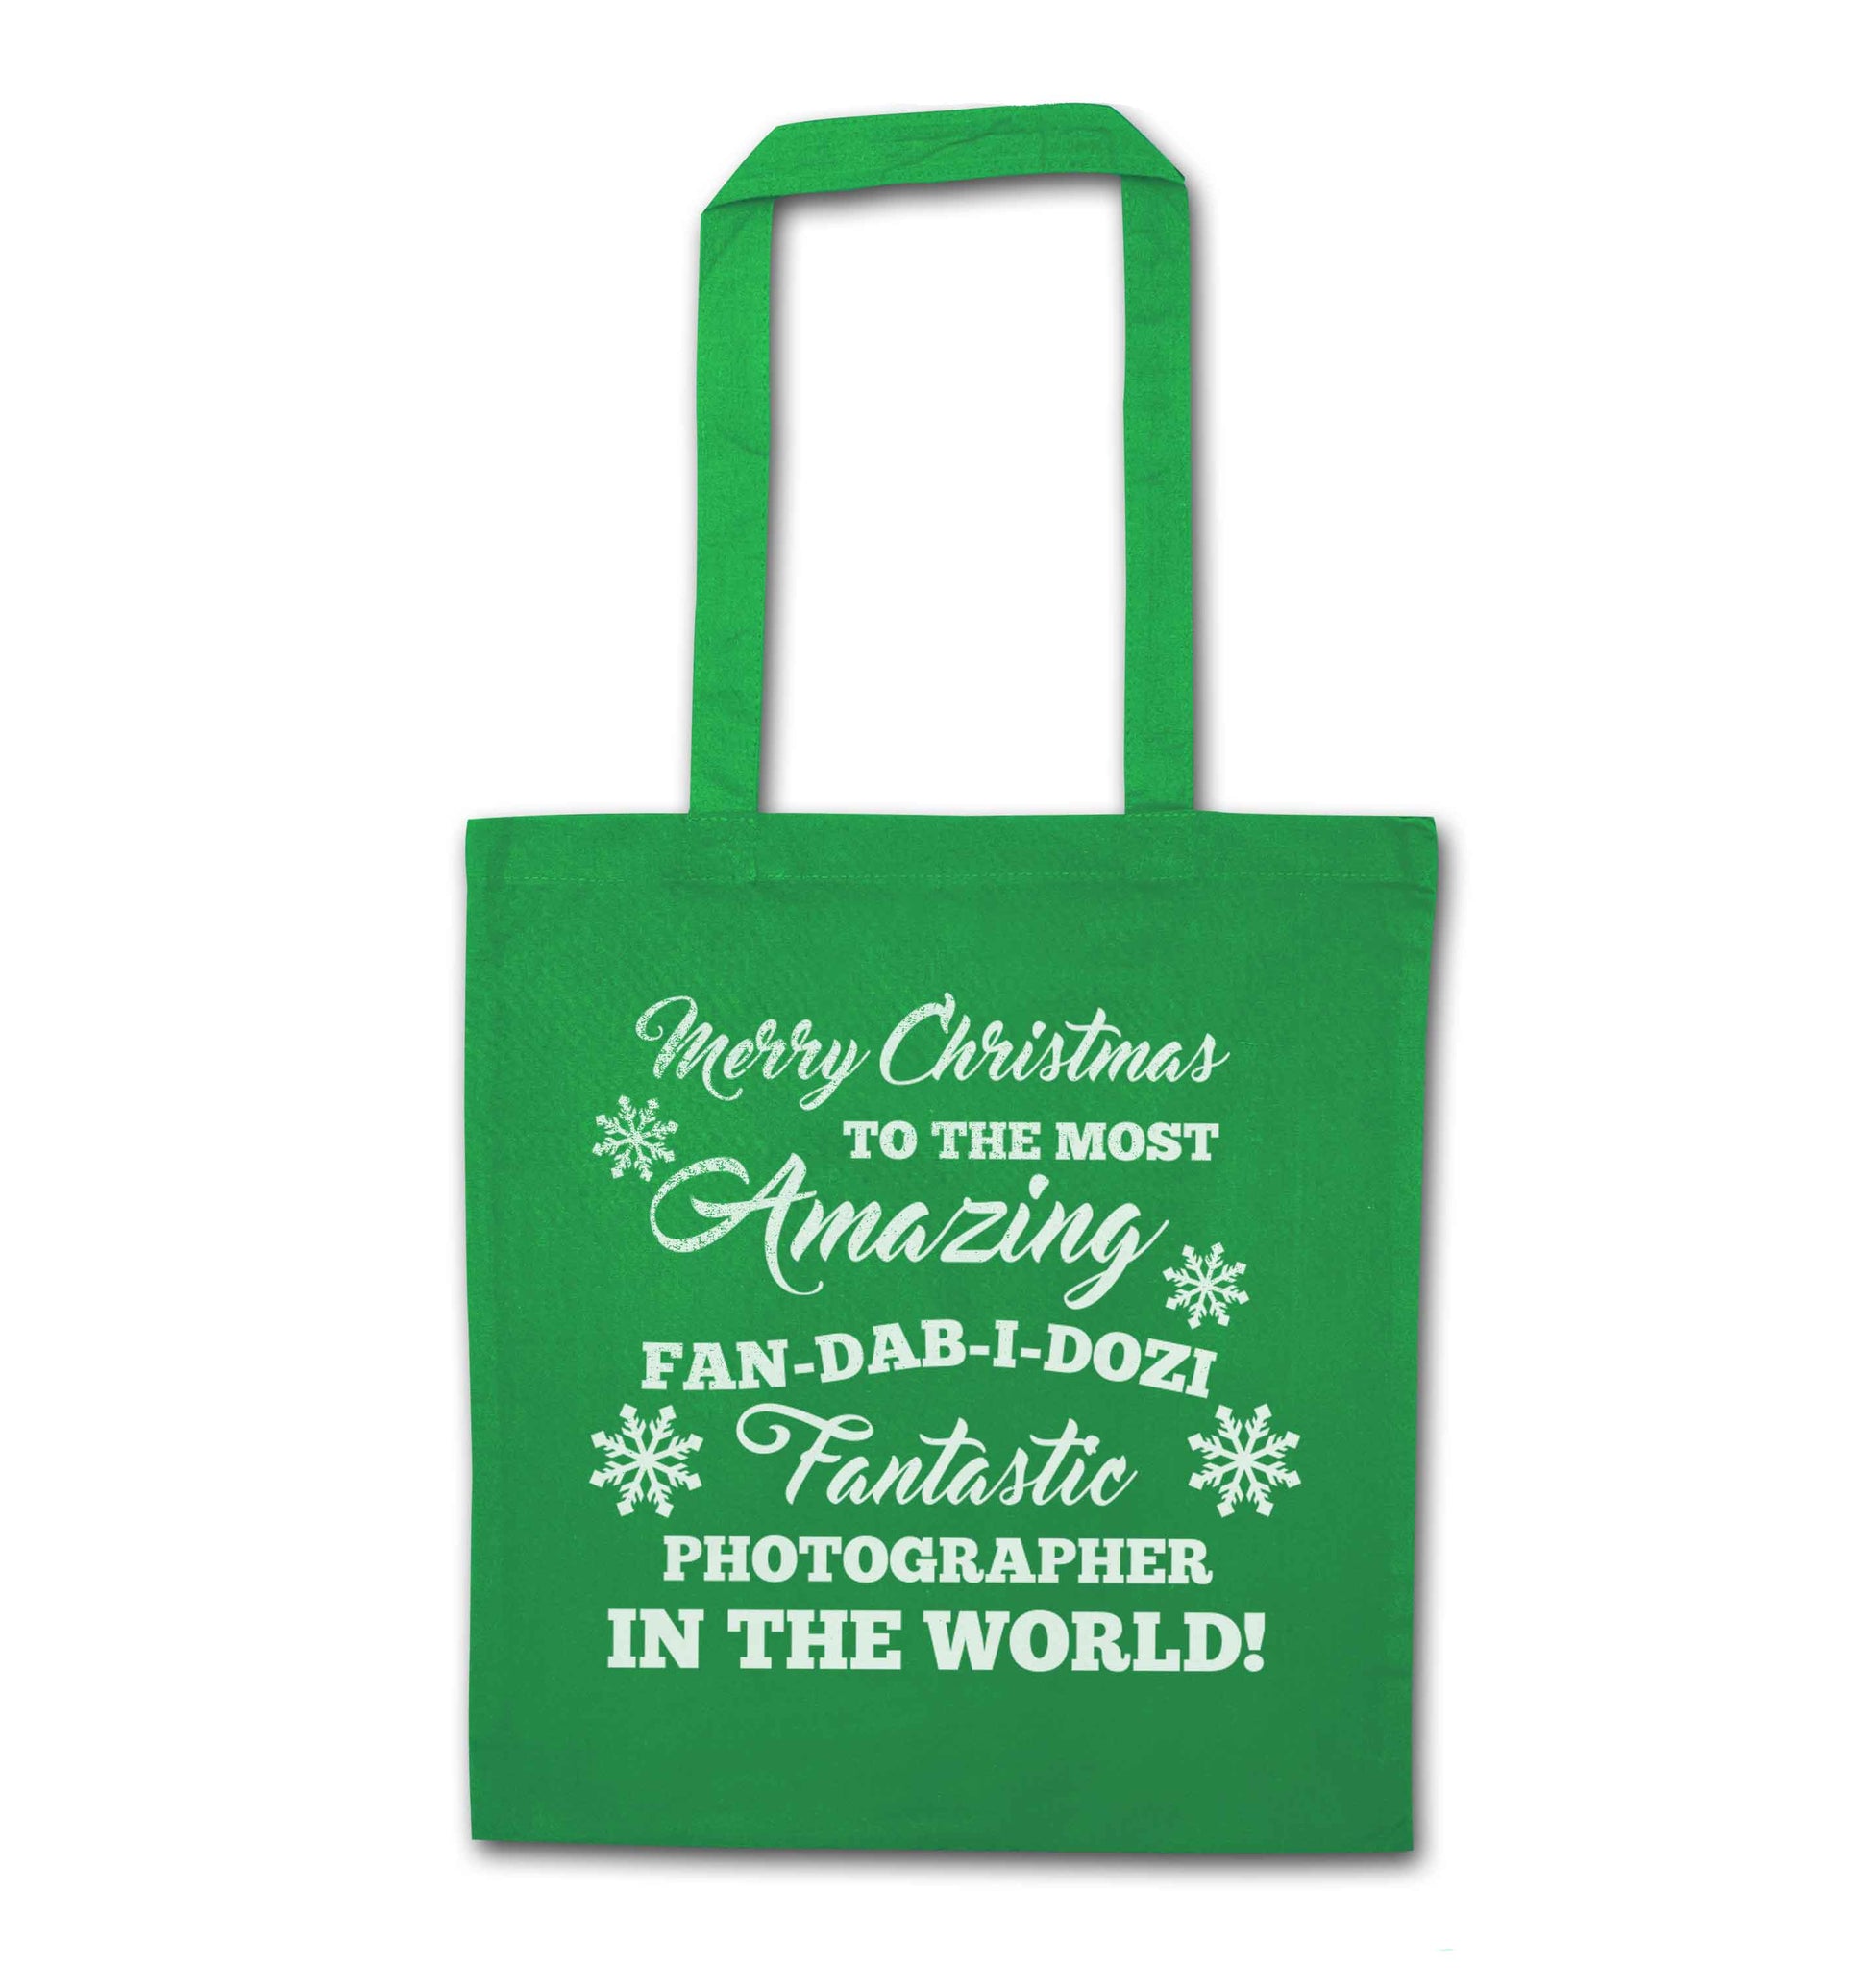 Merry Christmas to the most amazing fan-dab-i-dozi fantasic photographer in the world green tote bag